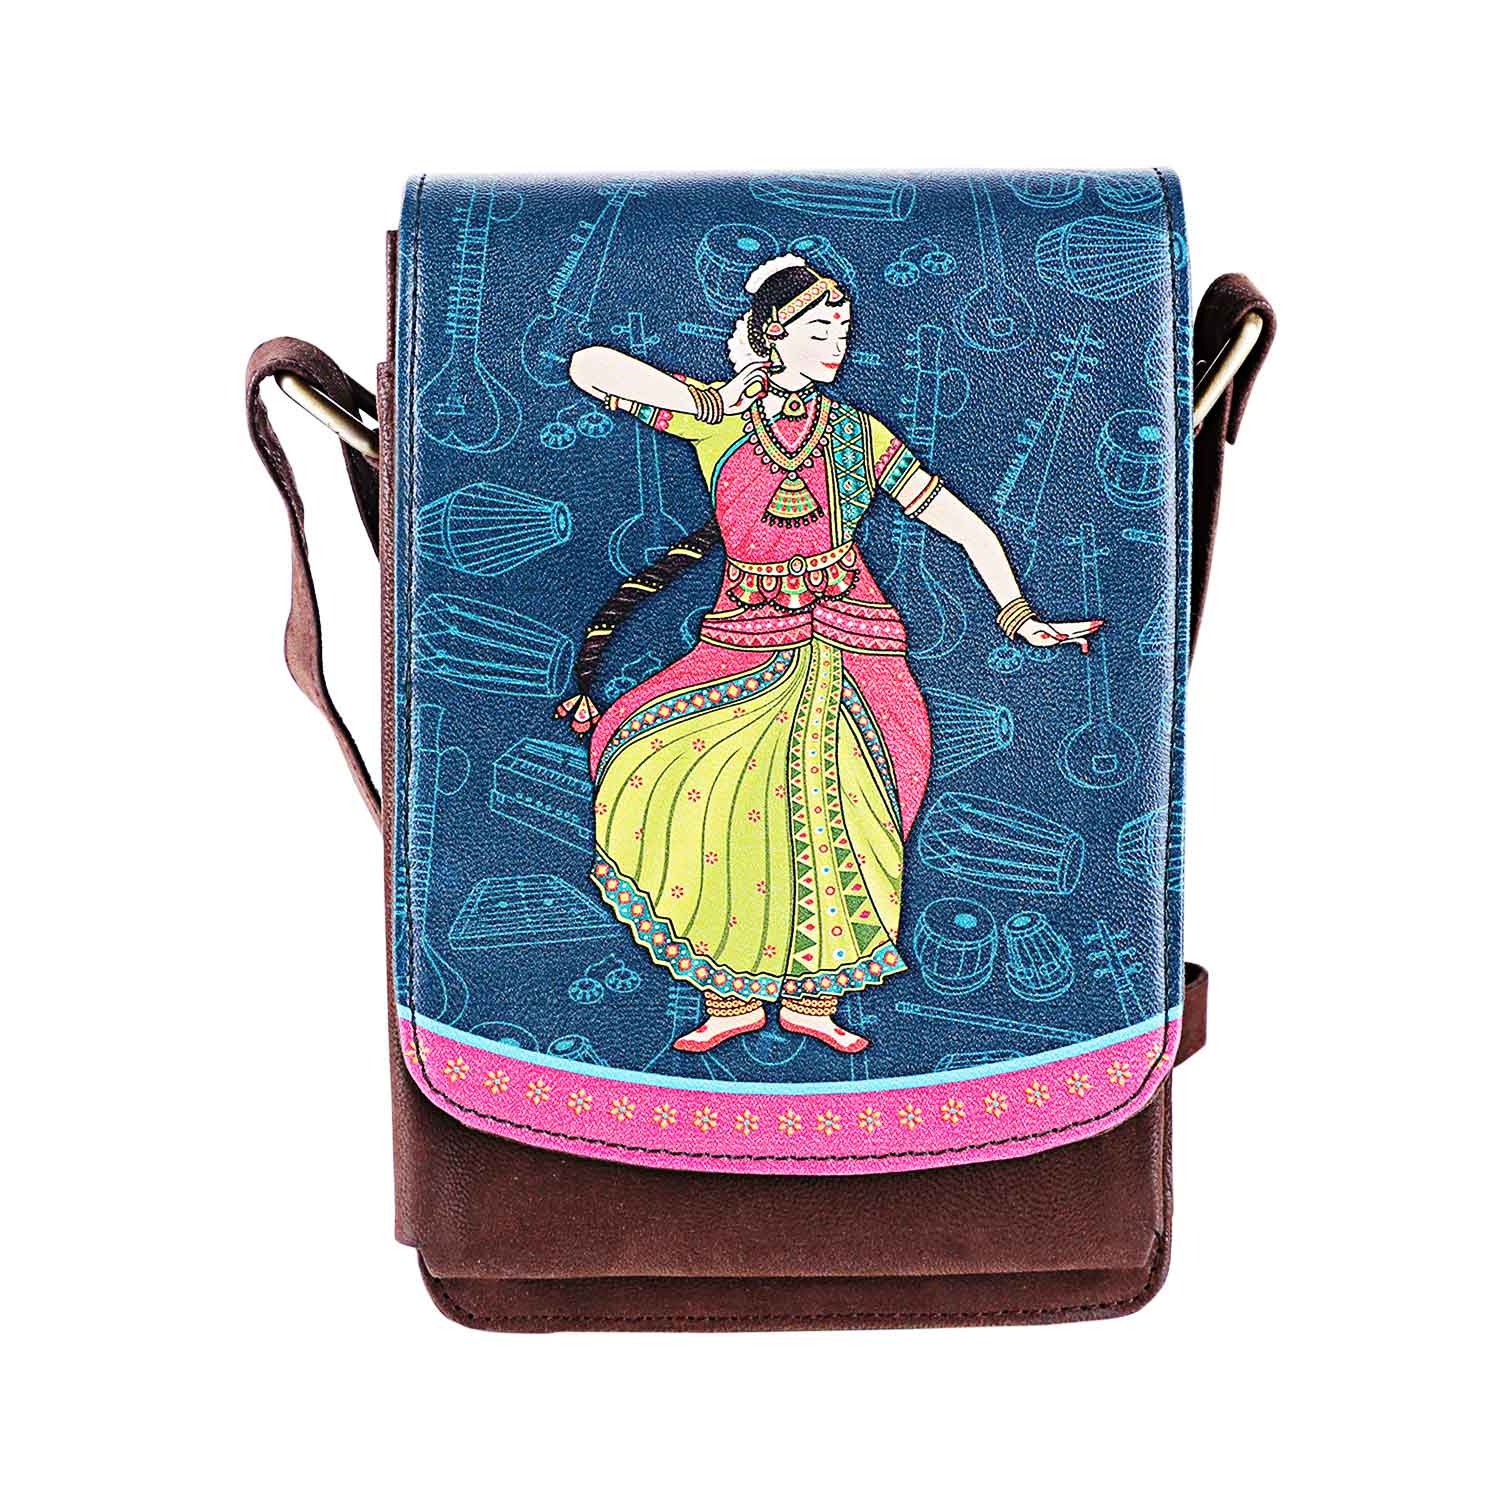 Rubans Golden Colour Sling Bag With Golden Coloured Embroidery.